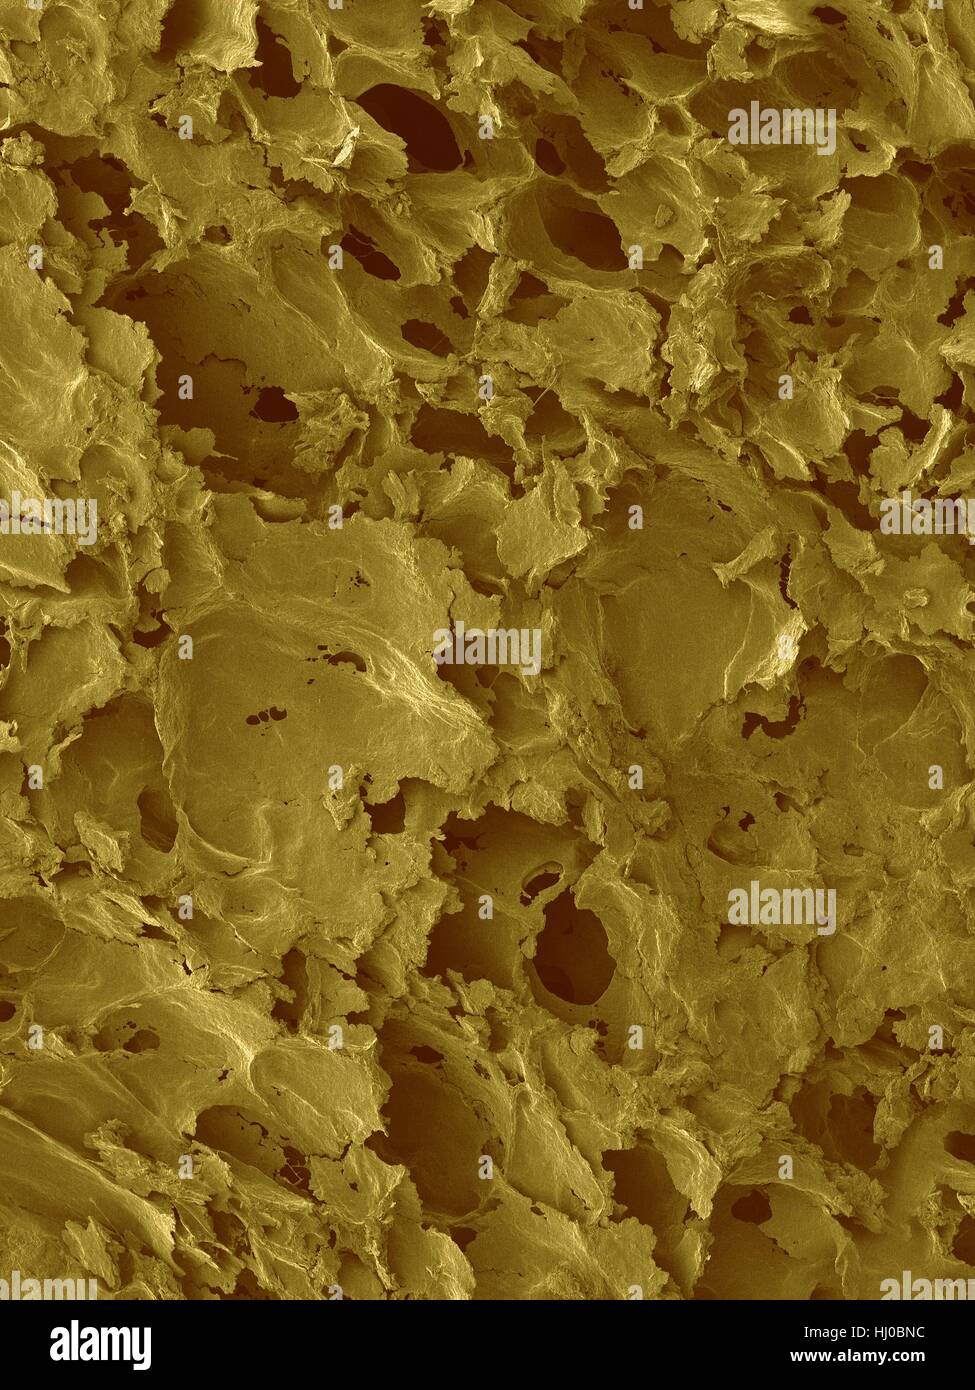 Coloured scanning electron micrograph (SEM) of White bread surface.Shown here is slice of white sandwich bread,revealing large airspaces that develop as result of action of yeast.White bread made from wheat flour that has bran germ removed through process known as milling.Milling gives white flour Stock Photo